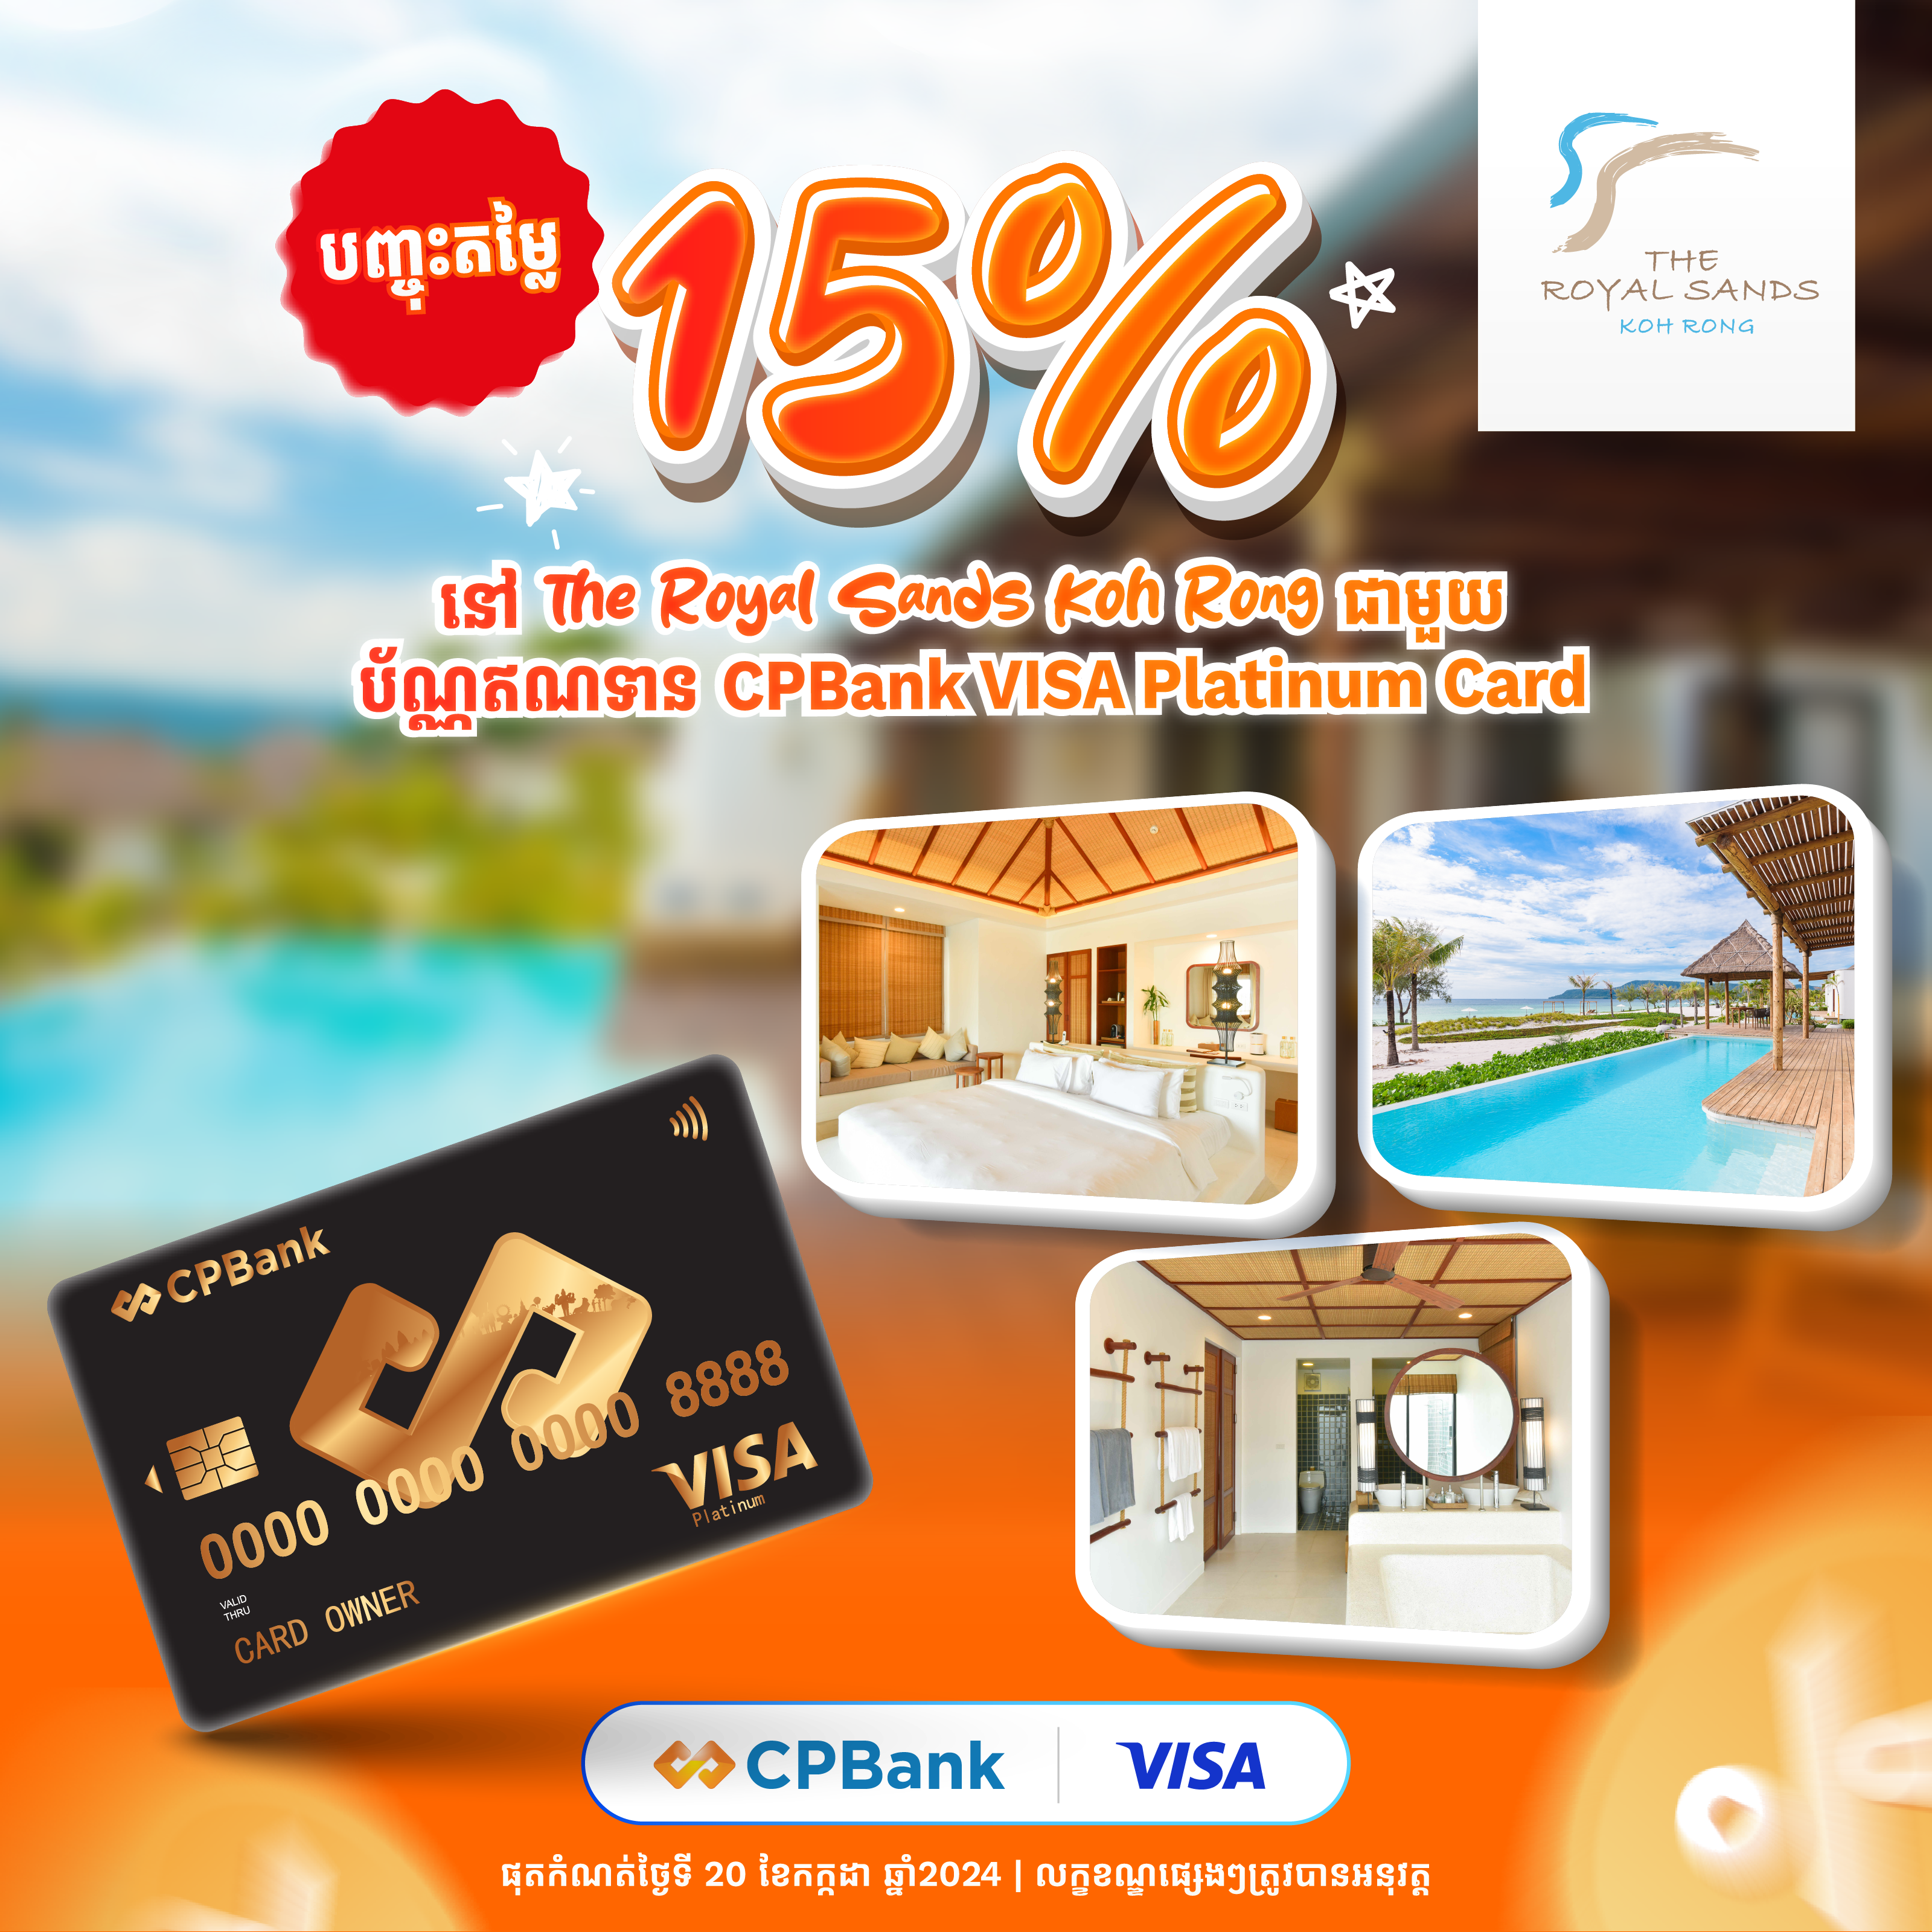 Get 15% off from The Royal Sands Koh Rong with CPBank VISA Platinum Cards